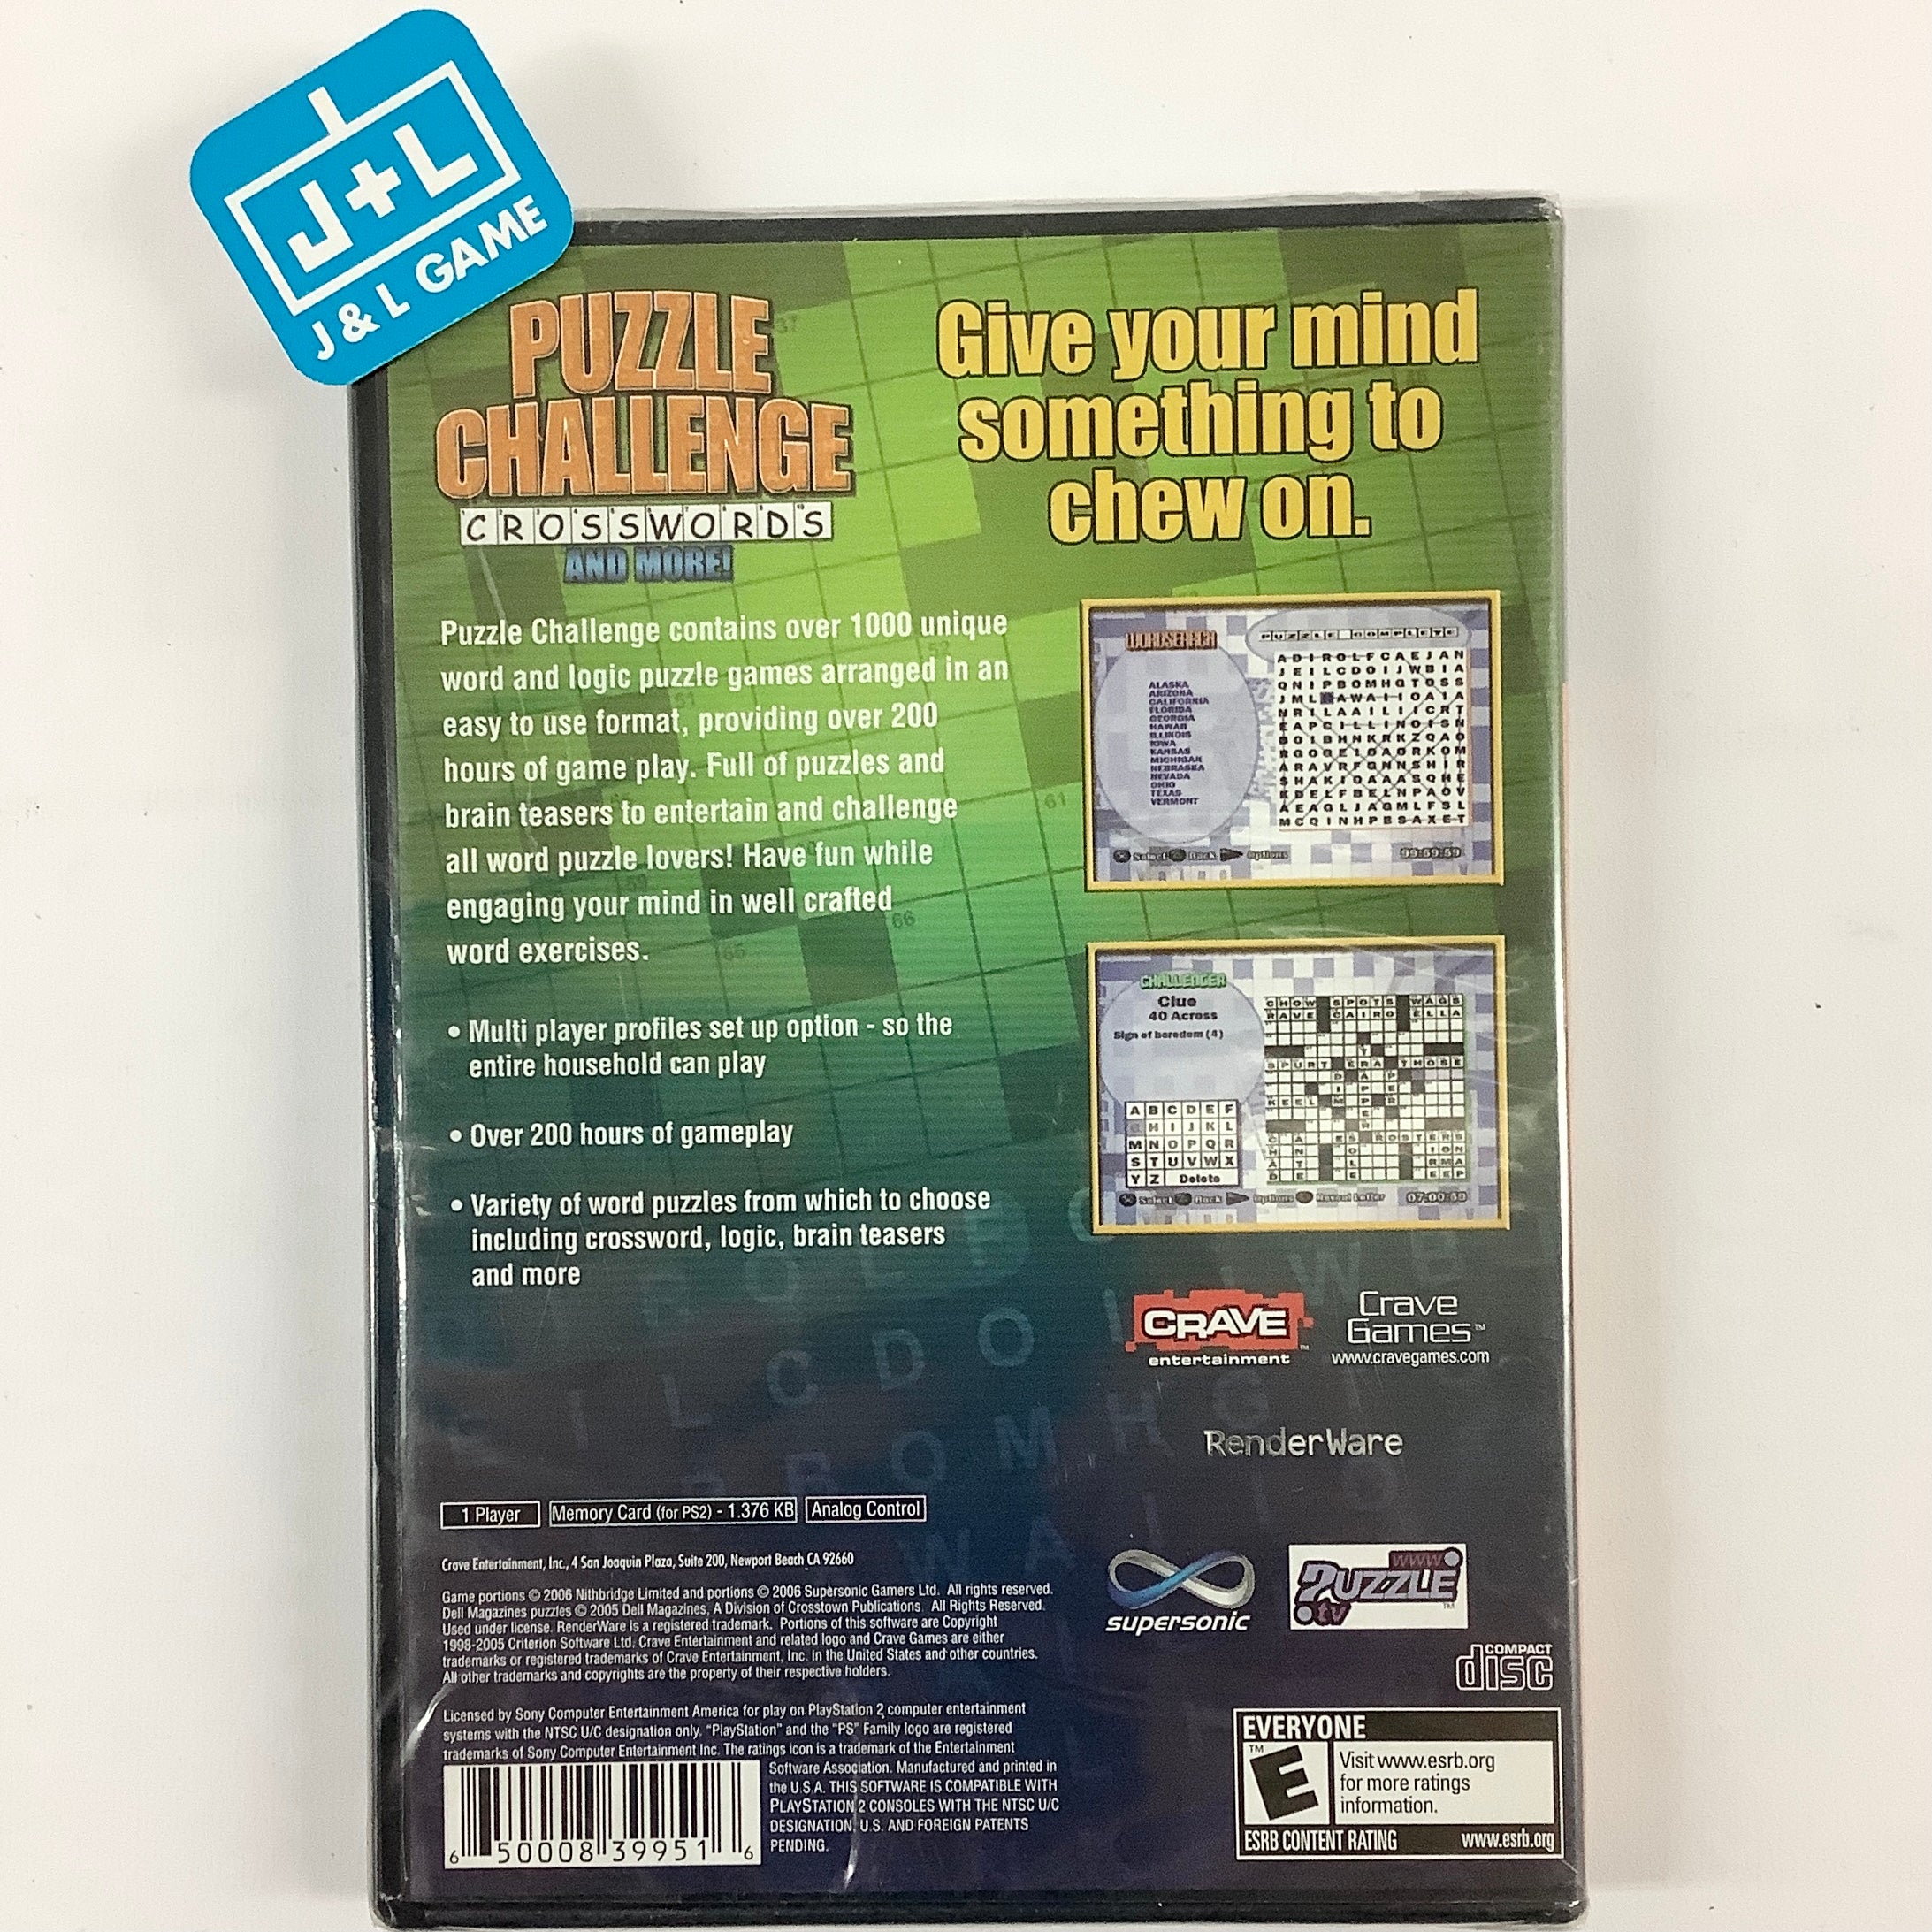 Puzzle Challenge: Crosswords And More! - (PS2) PlayStation 2 Video Games Crave   